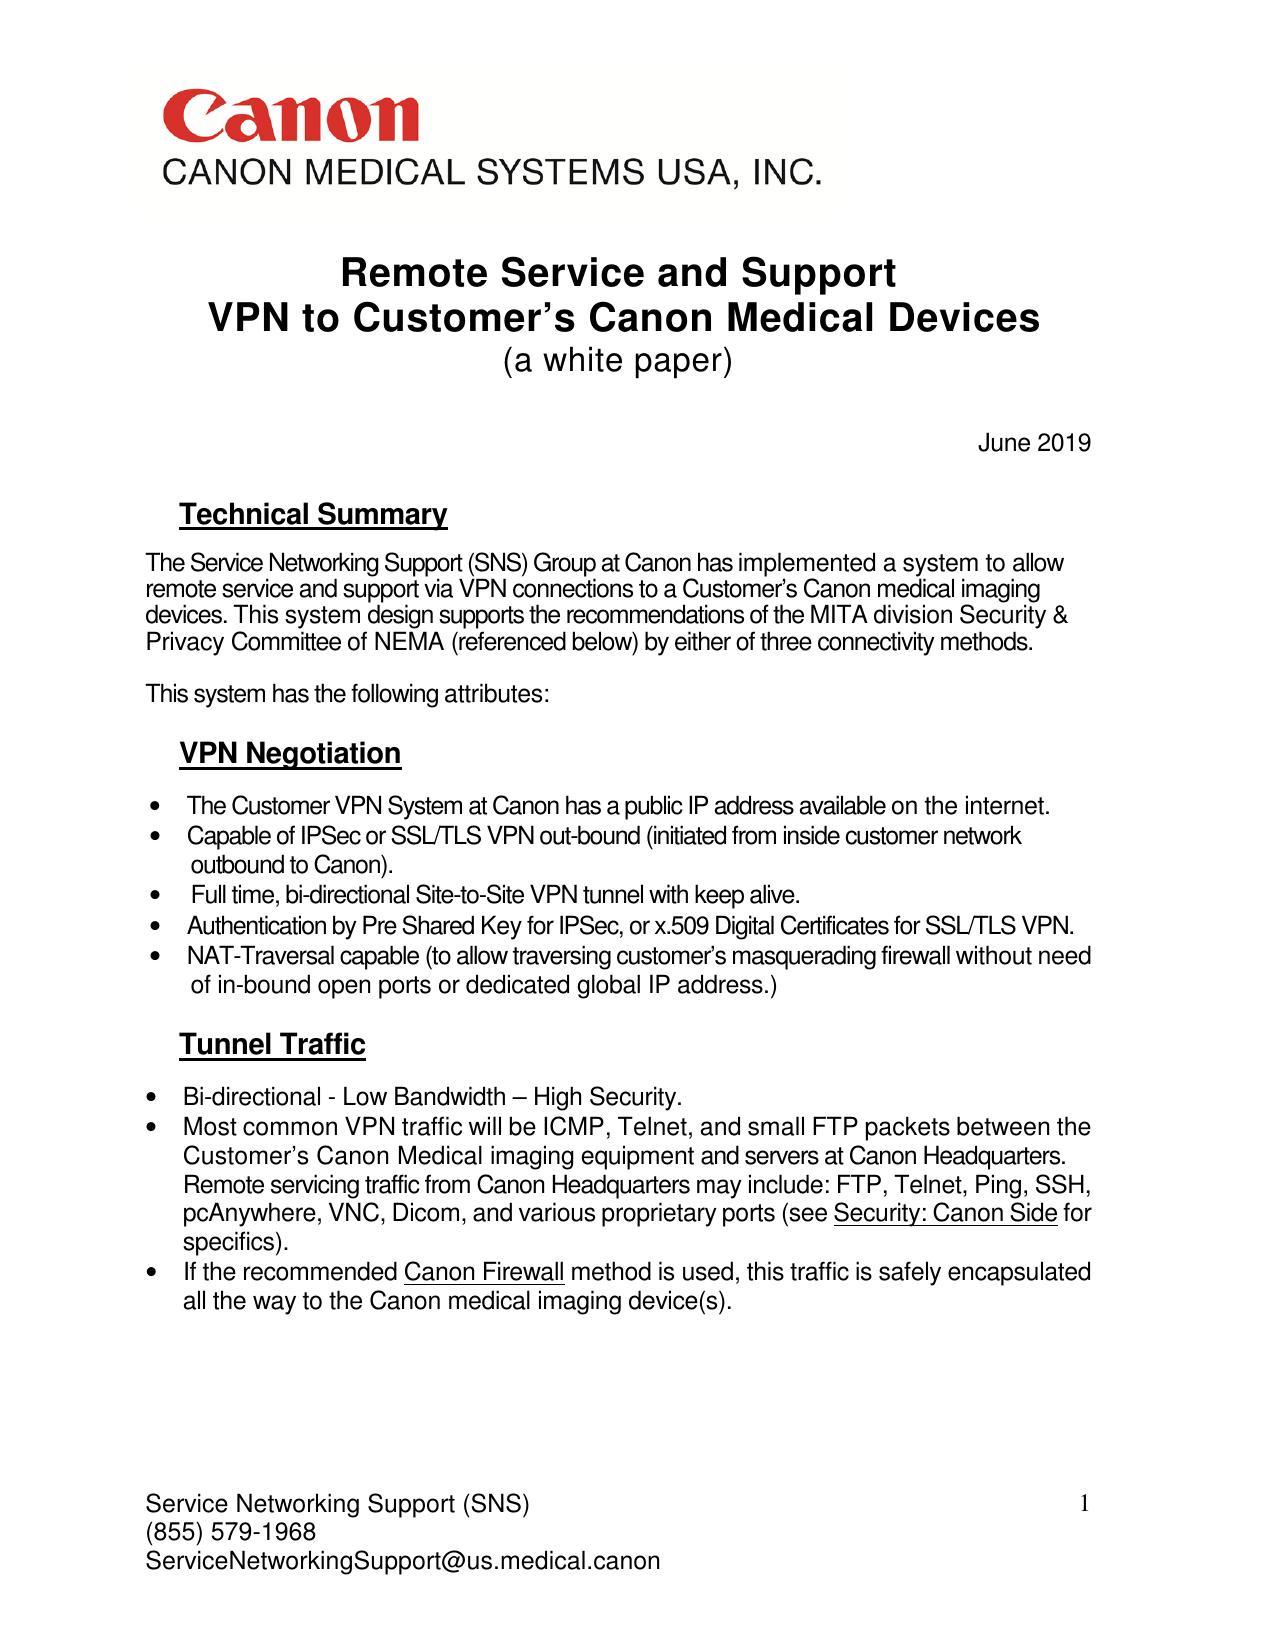 canon-medical-systems-usa-inc-remote-service-and-support-vpn-to-customers-canon-medical-devices.pdf